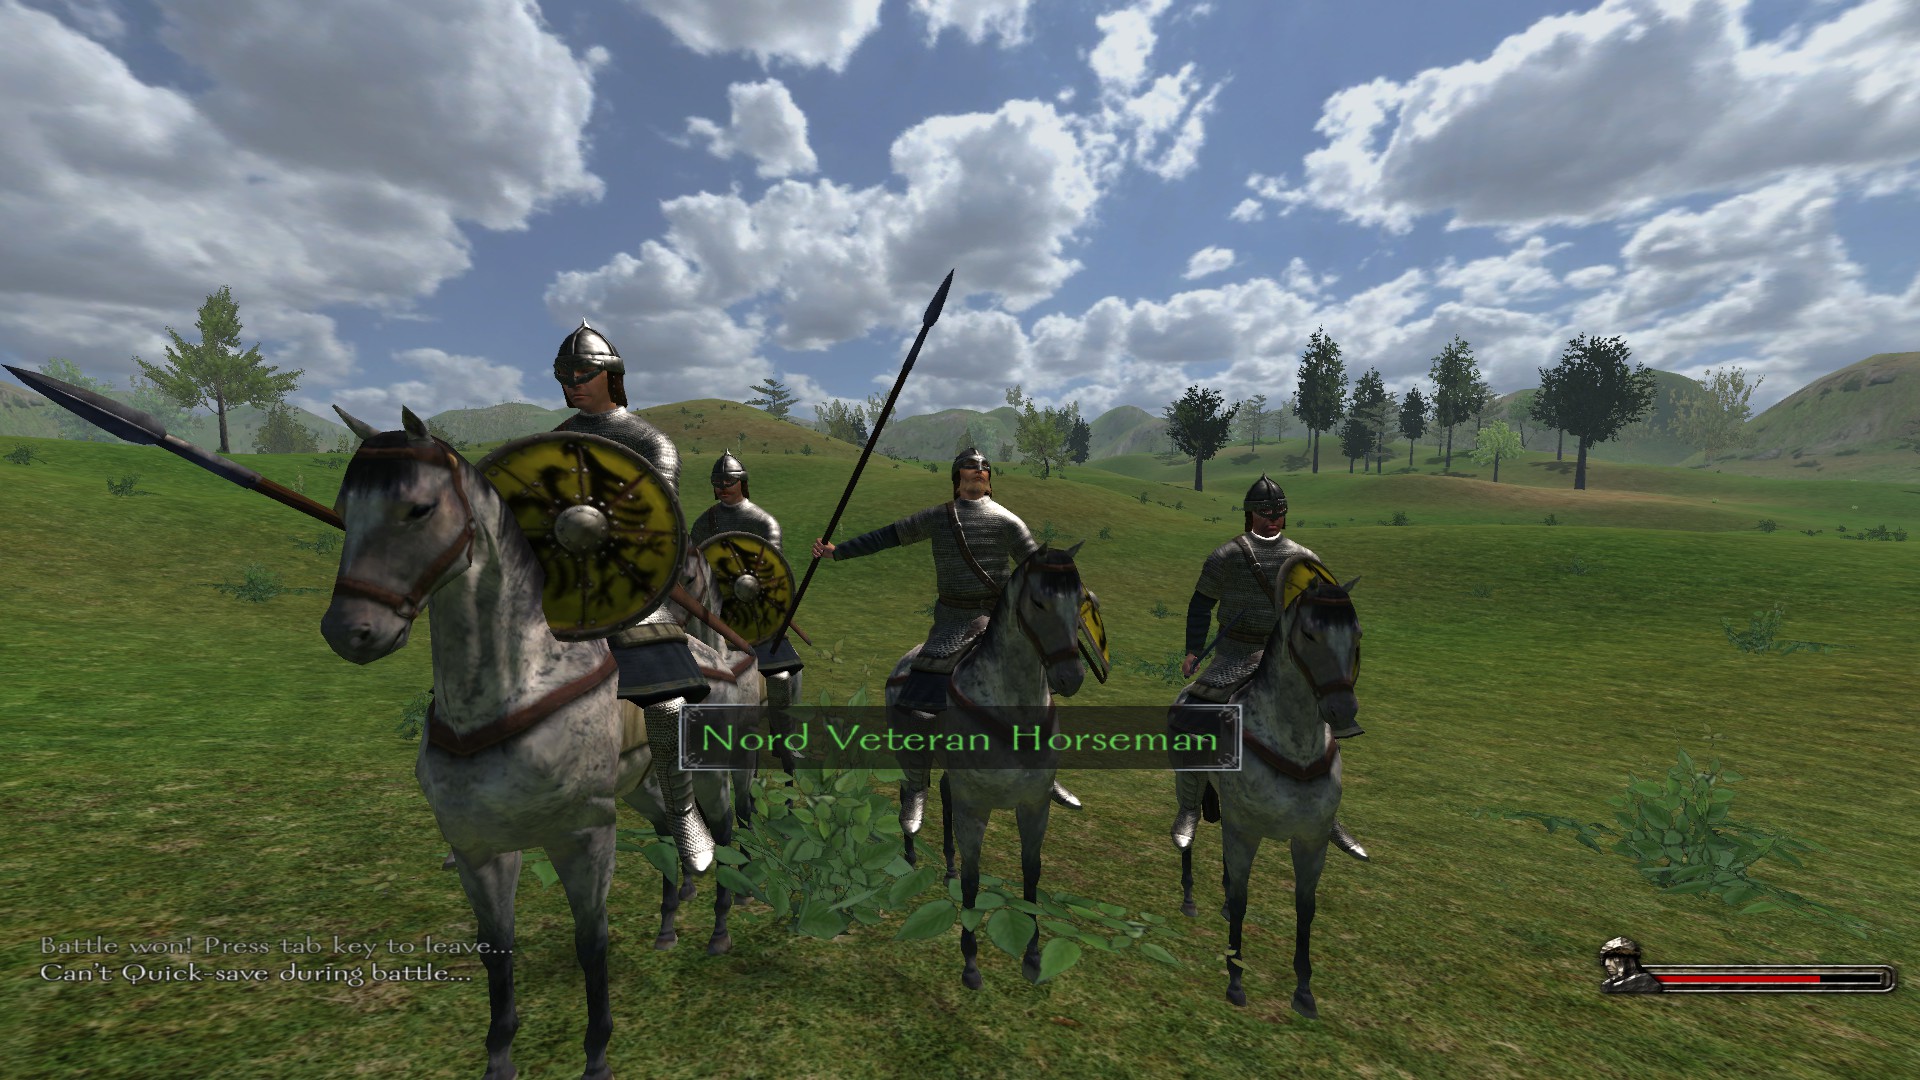 Mount blade warband города. Ветеран Норд Mount and Blade. Ветеран Варяг Маунт блейд. Diplomacy Mount and Blade Warband Скриншоты. Венгерский ветеран Mount and Blade Warband.